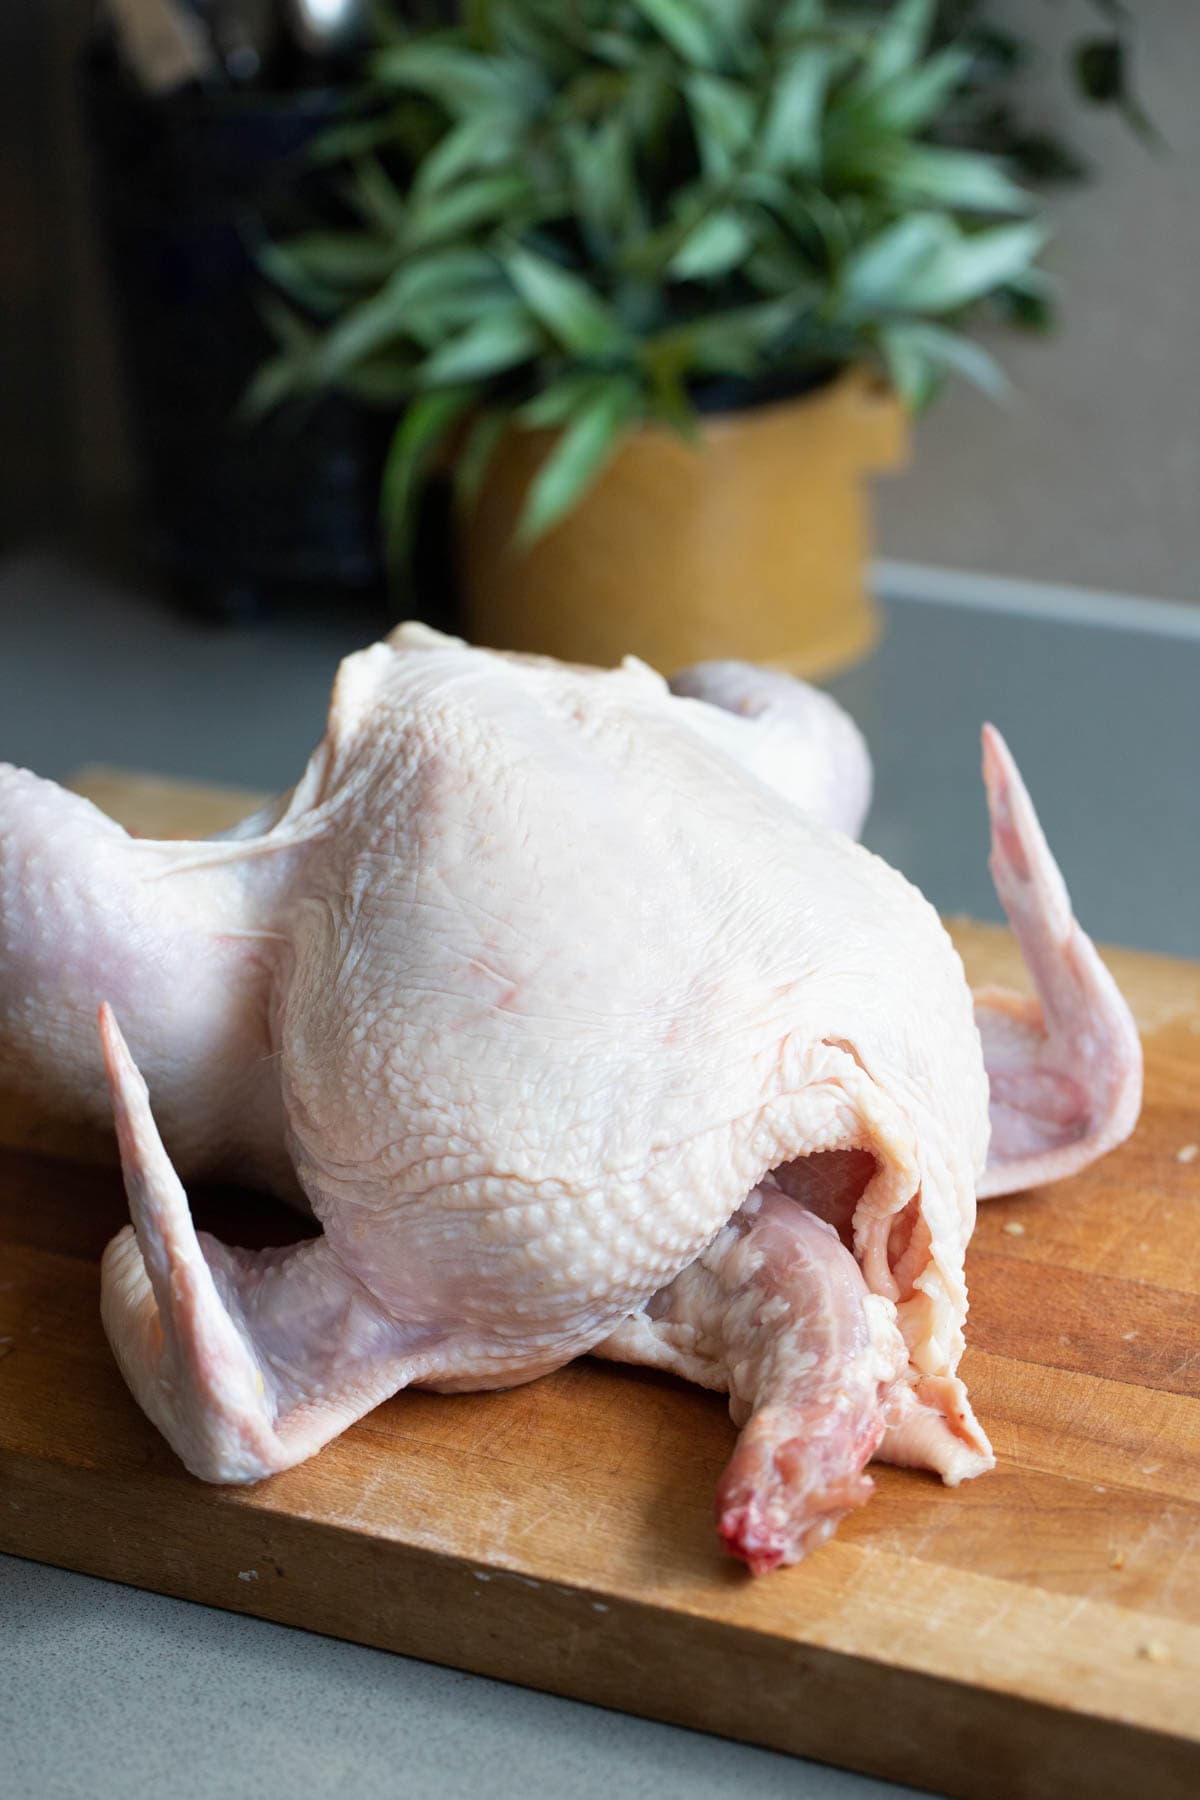 A whole chicken on a cutting board.